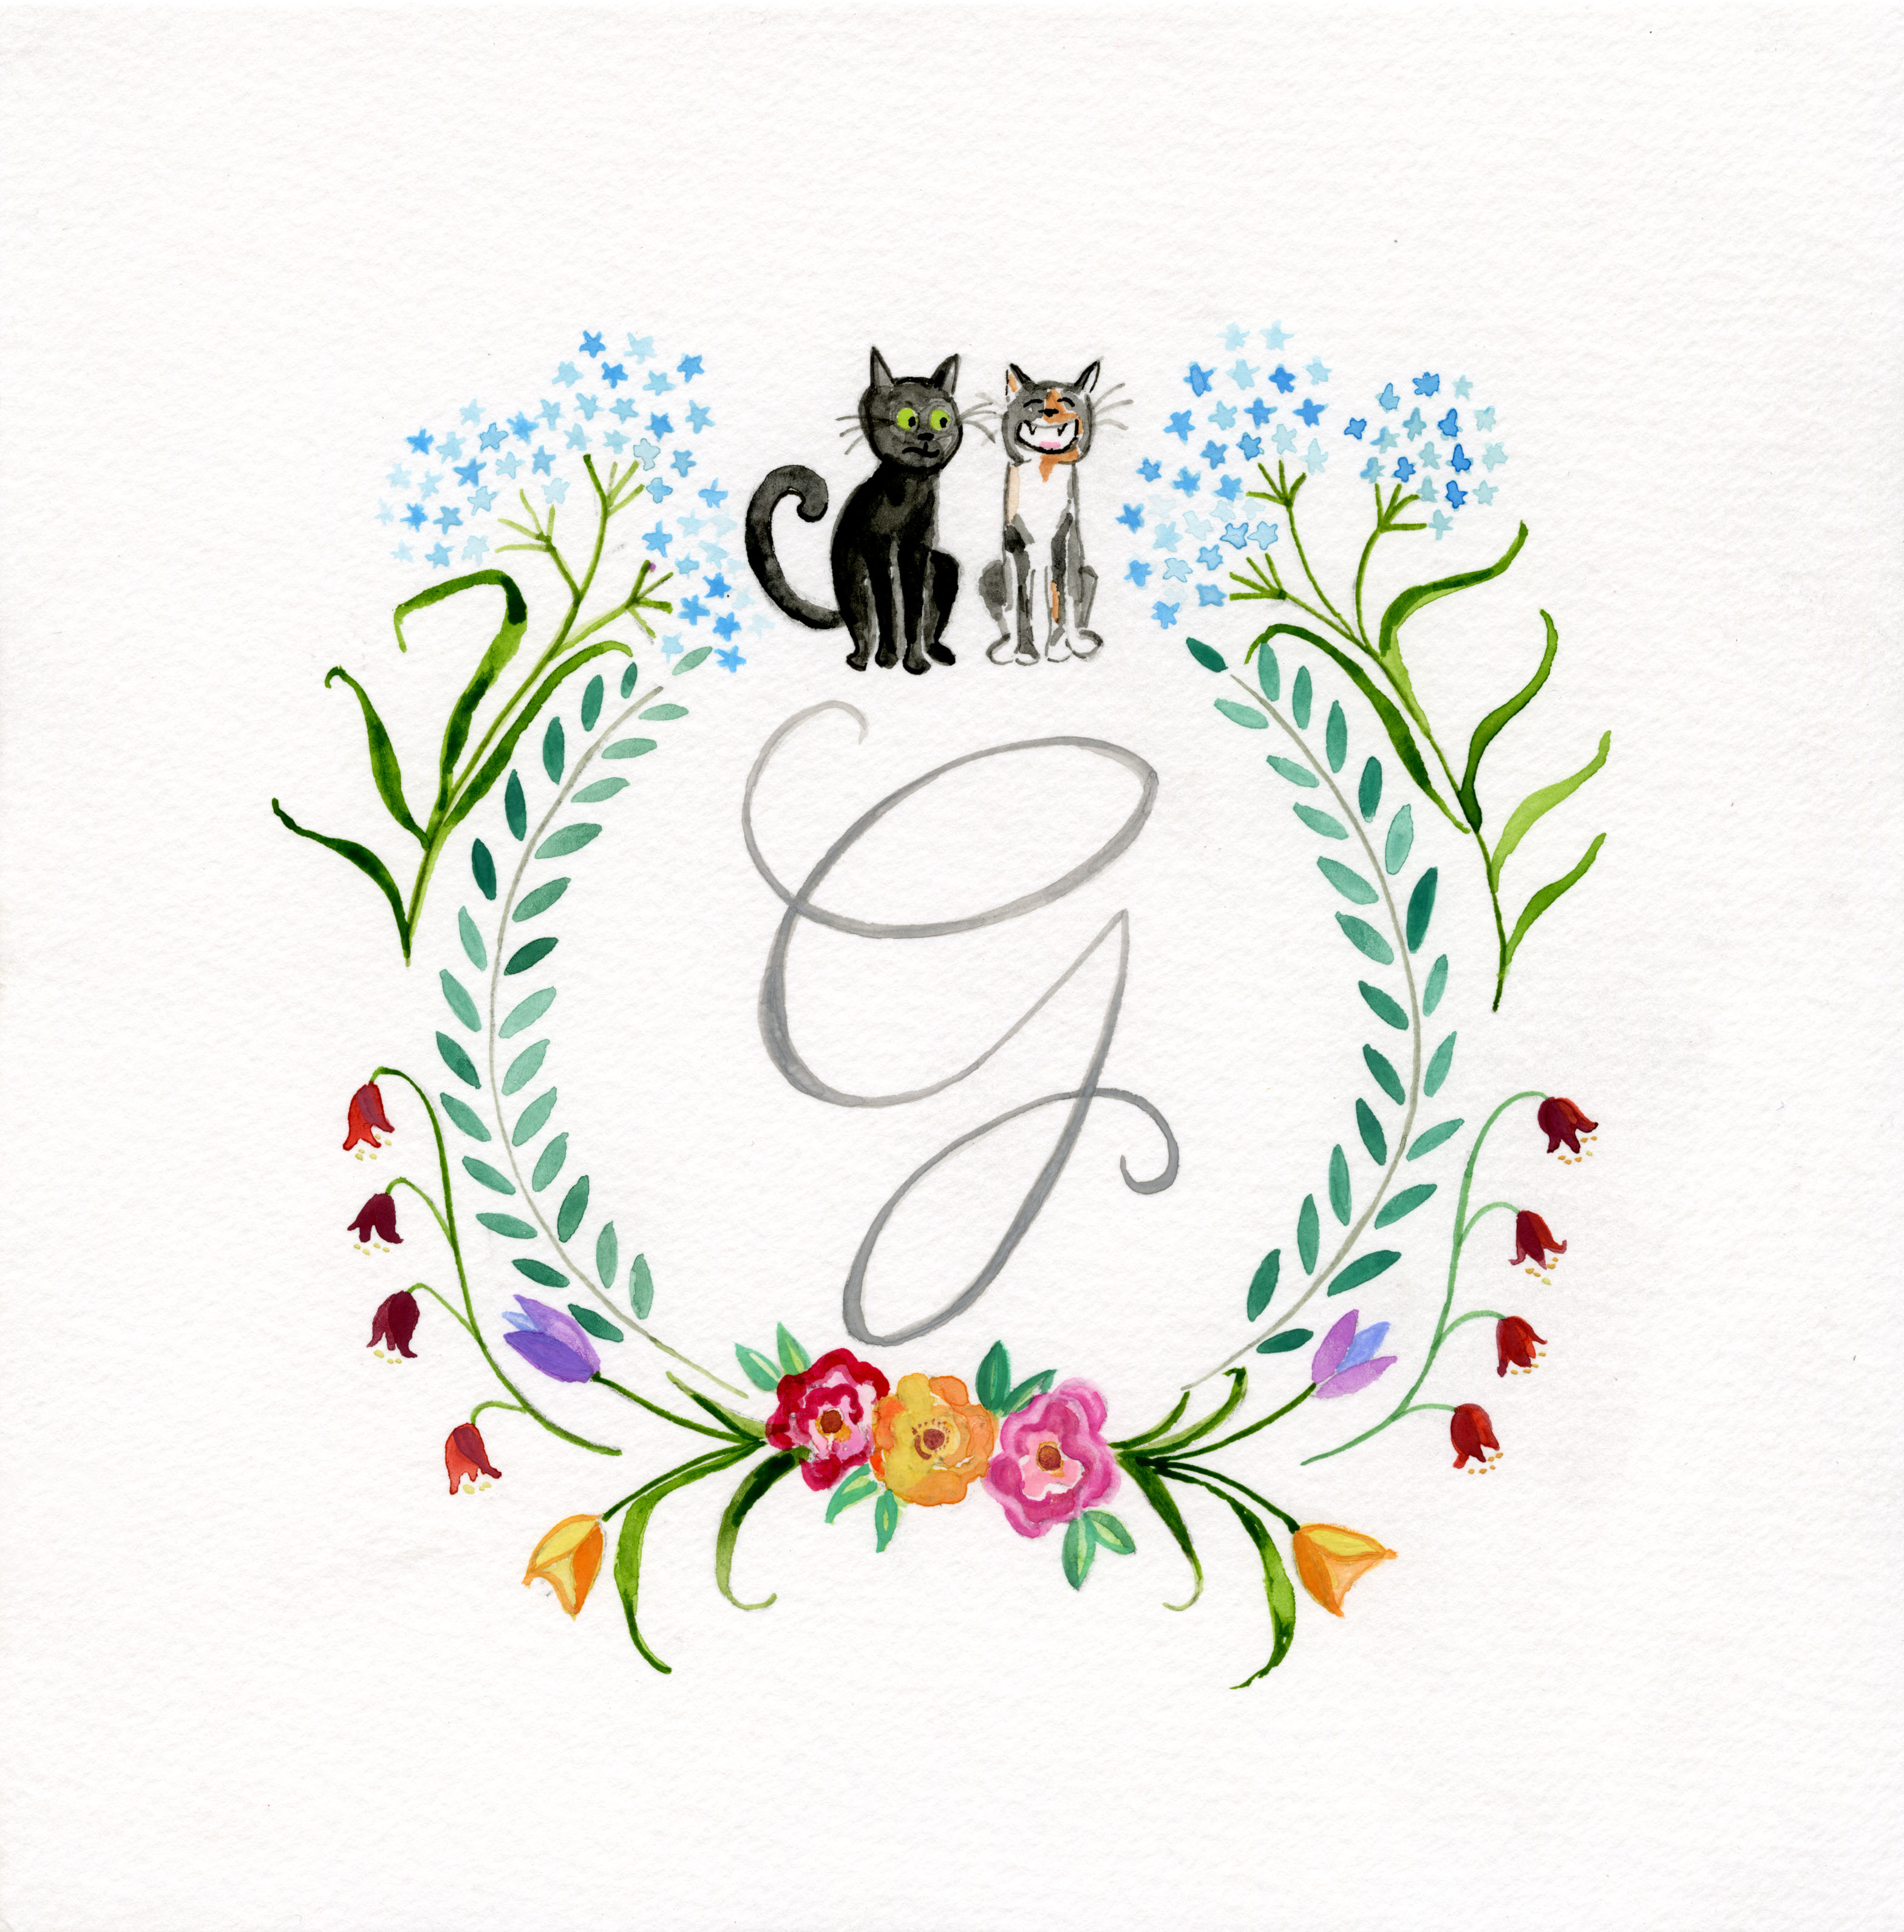 Small Crest / Kittens and Flowers